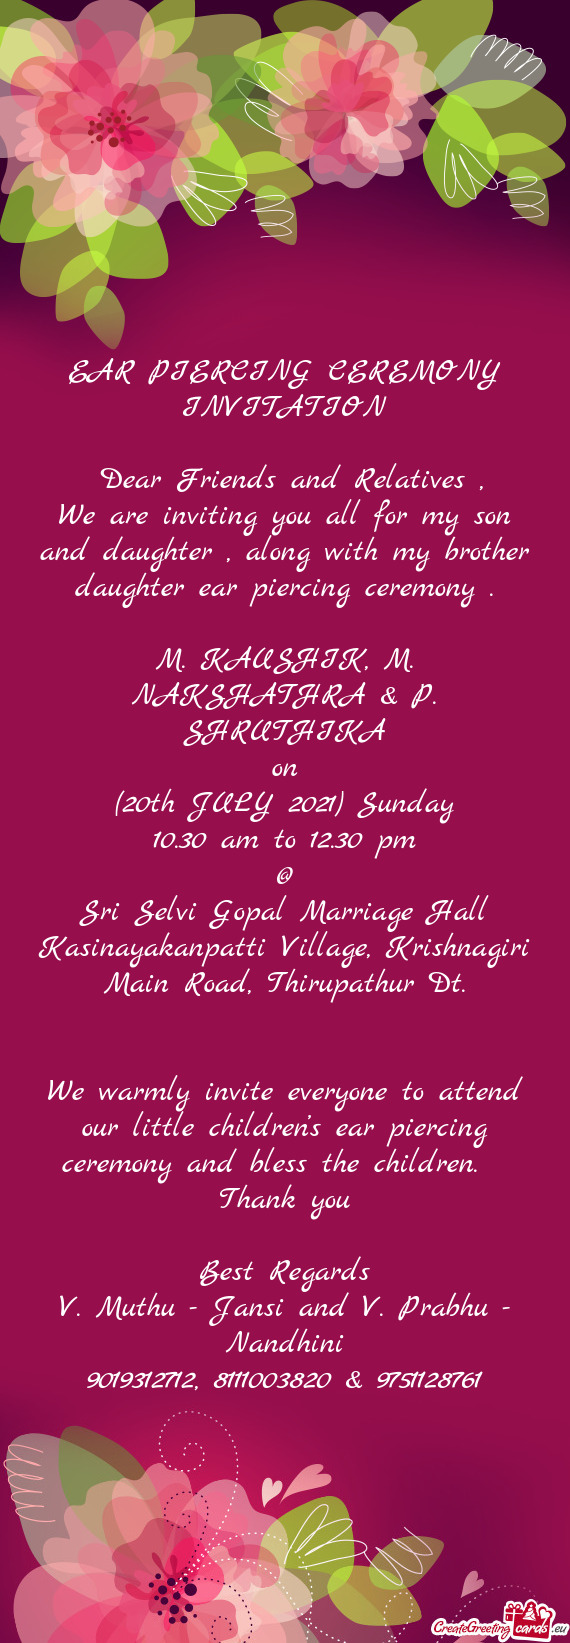 We are inviting you all for my son and daughter , along with my brother daughter ear piercing ceremo